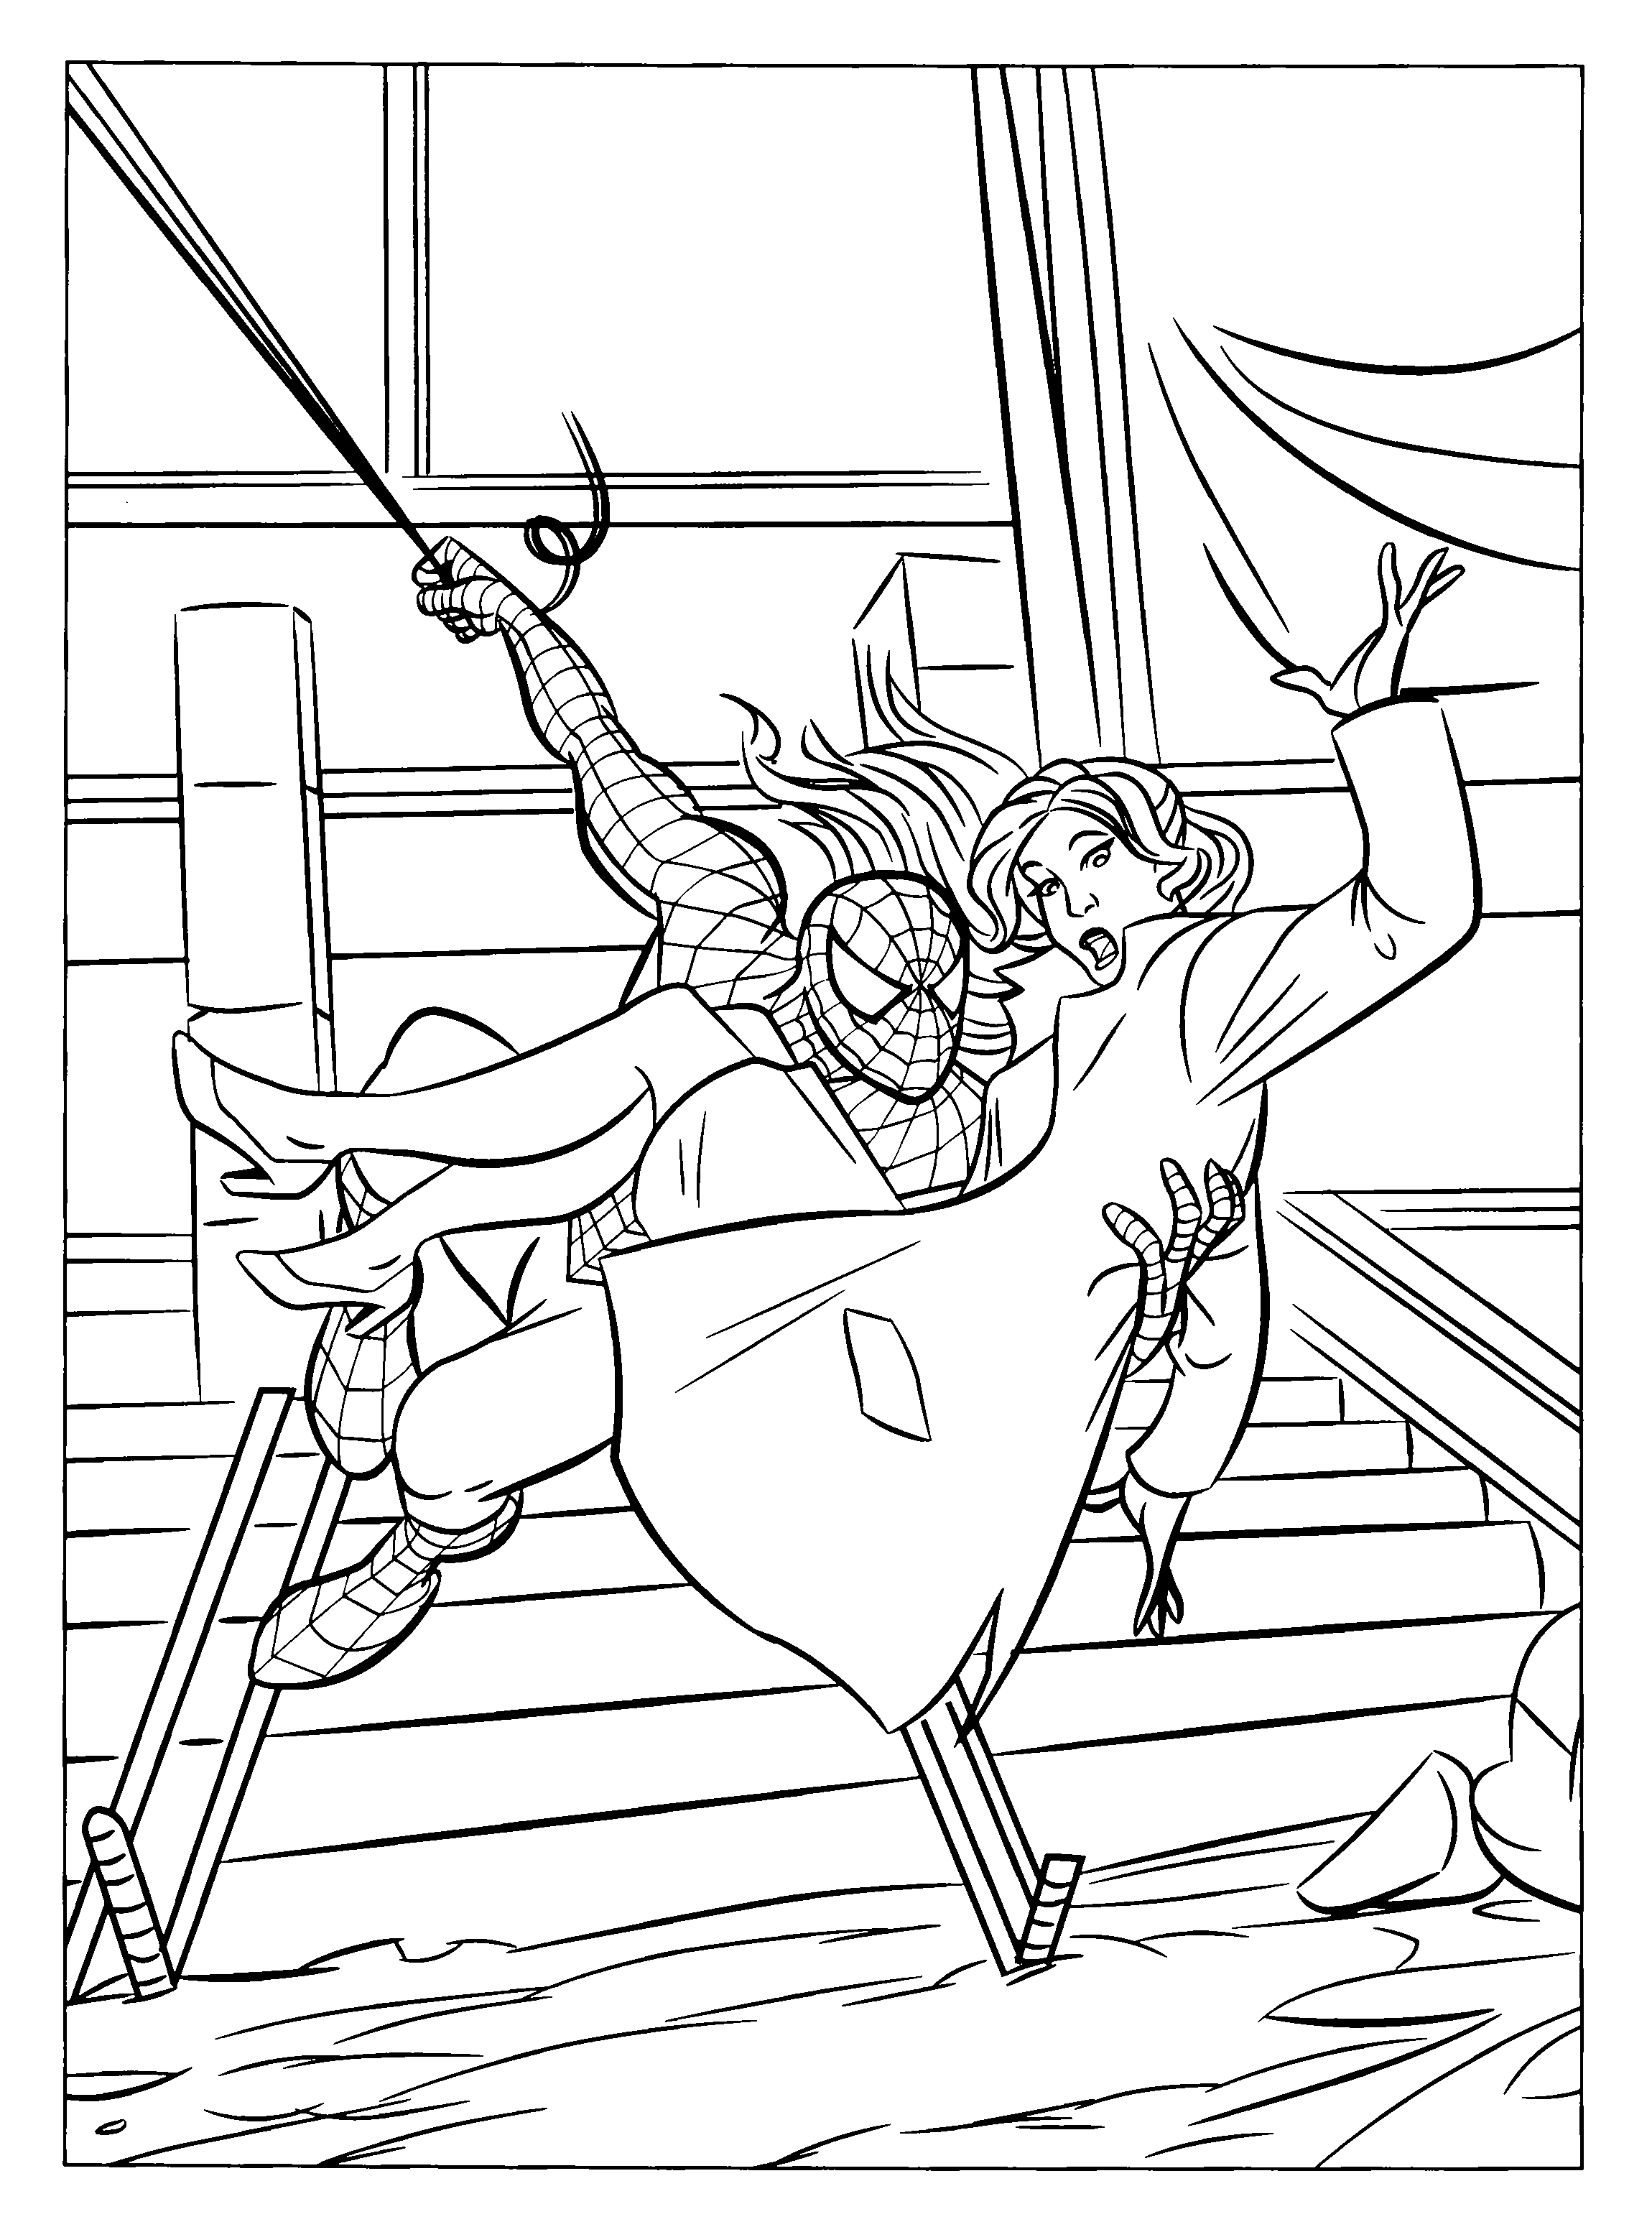 spider man coloring sheet spiderman coloring pages free download on clipartmag sheet spider coloring man 